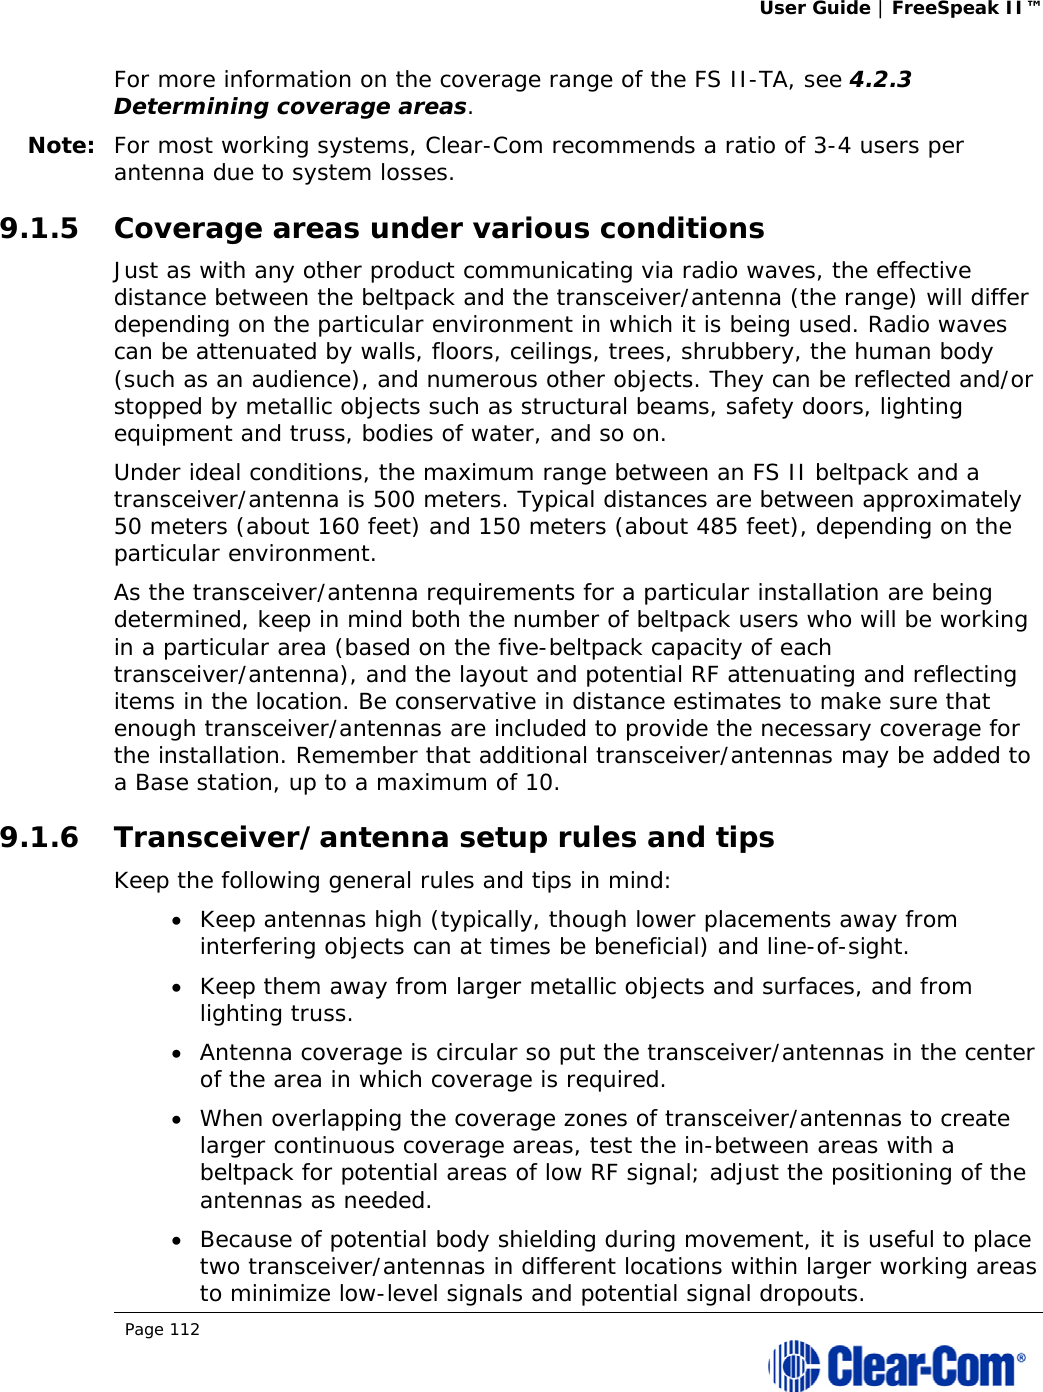 User Guide | FreeSpeak II™  Page 112  For more information on the coverage range of the FS II-TA, see 4.2.3 Determining coverage areas.  Note: For most working systems, Clear-Com recommends a ratio of 3-4 users per antenna due to system losses. 9.1.5 Coverage areas under various conditions Just as with any other product communicating via radio waves, the effective distance between the beltpack and the transceiver/antenna (the range) will differ depending on the particular environment in which it is being used. Radio waves can be attenuated by walls, floors, ceilings, trees, shrubbery, the human body (such as an audience), and numerous other objects. They can be reflected and/or stopped by metallic objects such as structural beams, safety doors, lighting equipment and truss, bodies of water, and so on.  Under ideal conditions, the maximum range between an FS II beltpack and a transceiver/antenna is 500 meters. Typical distances are between approximately 50 meters (about 160 feet) and 150 meters (about 485 feet), depending on the particular environment.  As the transceiver/antenna requirements for a particular installation are being determined, keep in mind both the number of beltpack users who will be working in a particular area (based on the five-beltpack capacity of each transceiver/antenna), and the layout and potential RF attenuating and reflecting items in the location. Be conservative in distance estimates to make sure that enough transceiver/antennas are included to provide the necessary coverage for the installation. Remember that additional transceiver/antennas may be added to a Base station, up to a maximum of 10. 9.1.6 Transceiver/antenna setup rules and tips Keep the following general rules and tips in mind:  Keep antennas high (typically, though lower placements away from interfering objects can at times be beneficial) and line-of-sight.  Keep them away from larger metallic objects and surfaces, and from lighting truss.   Antenna coverage is circular so put the transceiver/antennas in the center of the area in which coverage is required.  When overlapping the coverage zones of transceiver/antennas to create larger continuous coverage areas, test the in-between areas with a beltpack for potential areas of low RF signal; adjust the positioning of the antennas as needed.  Because of potential body shielding during movement, it is useful to place two transceiver/antennas in different locations within larger working areas to minimize low-level signals and potential signal dropouts. 